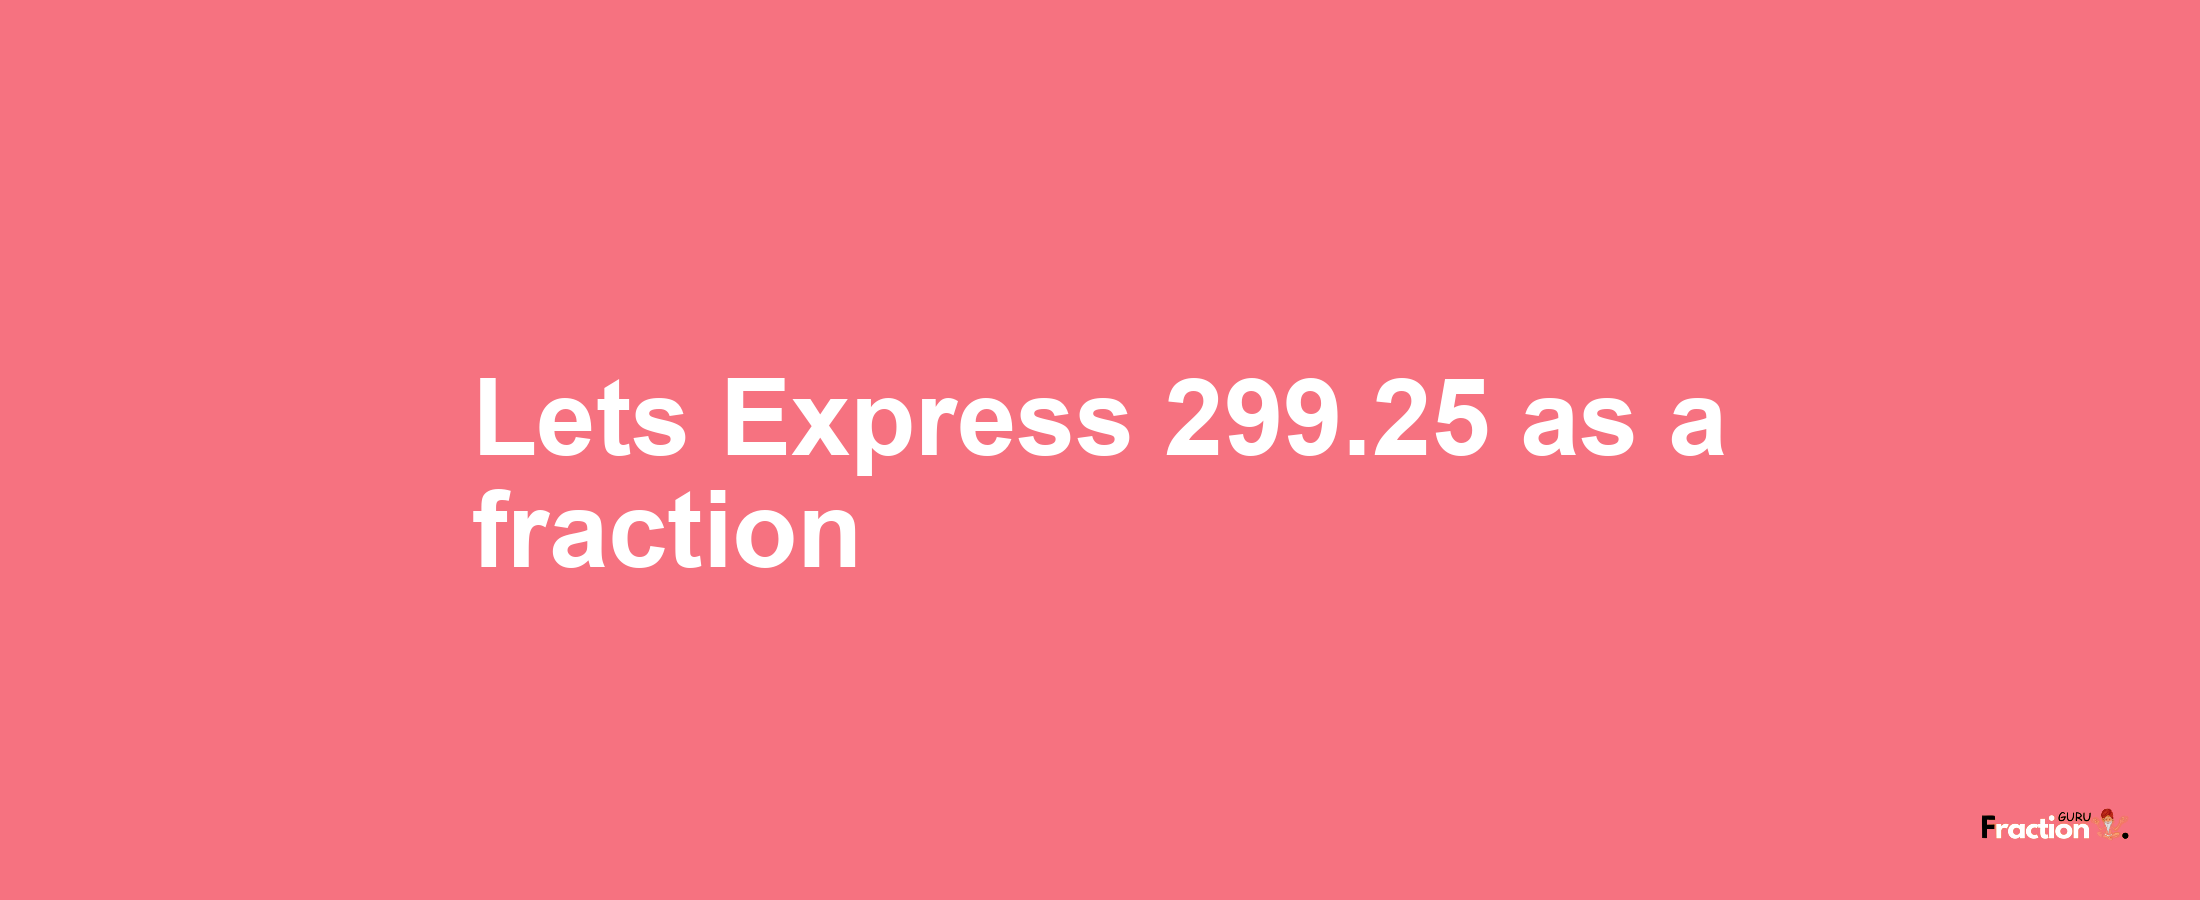 Lets Express 299.25 as afraction